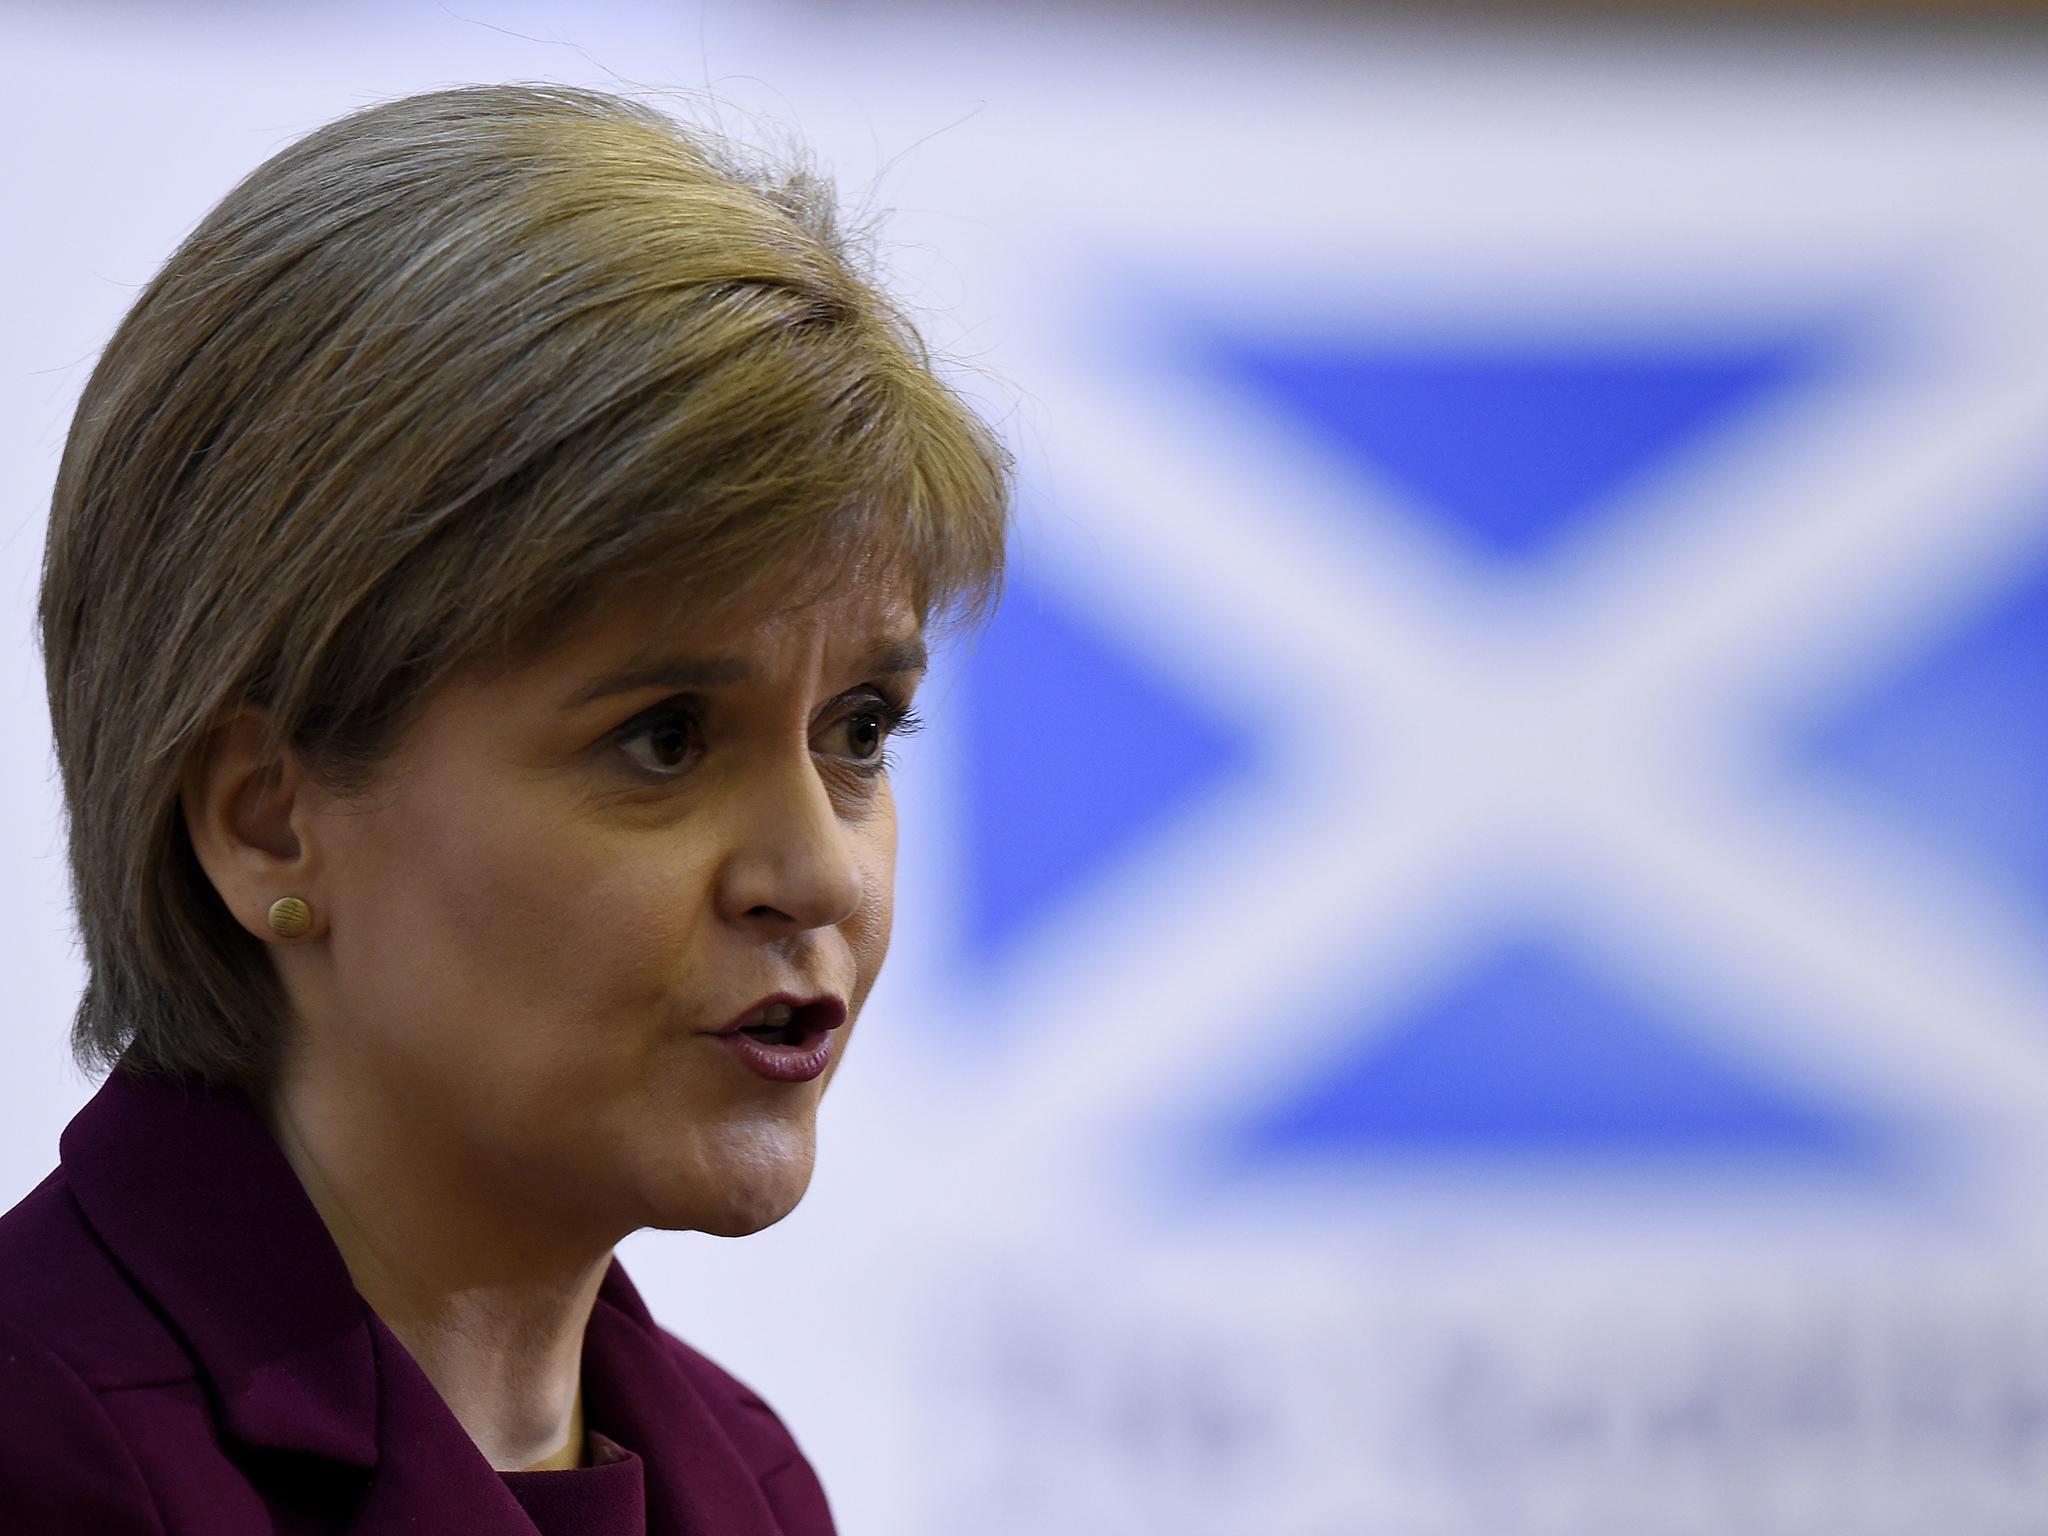 The message of the Brexit campaign was to 'take back control' – precisely the line Nicola Sturgeon and the SNP have promoted over Scotland